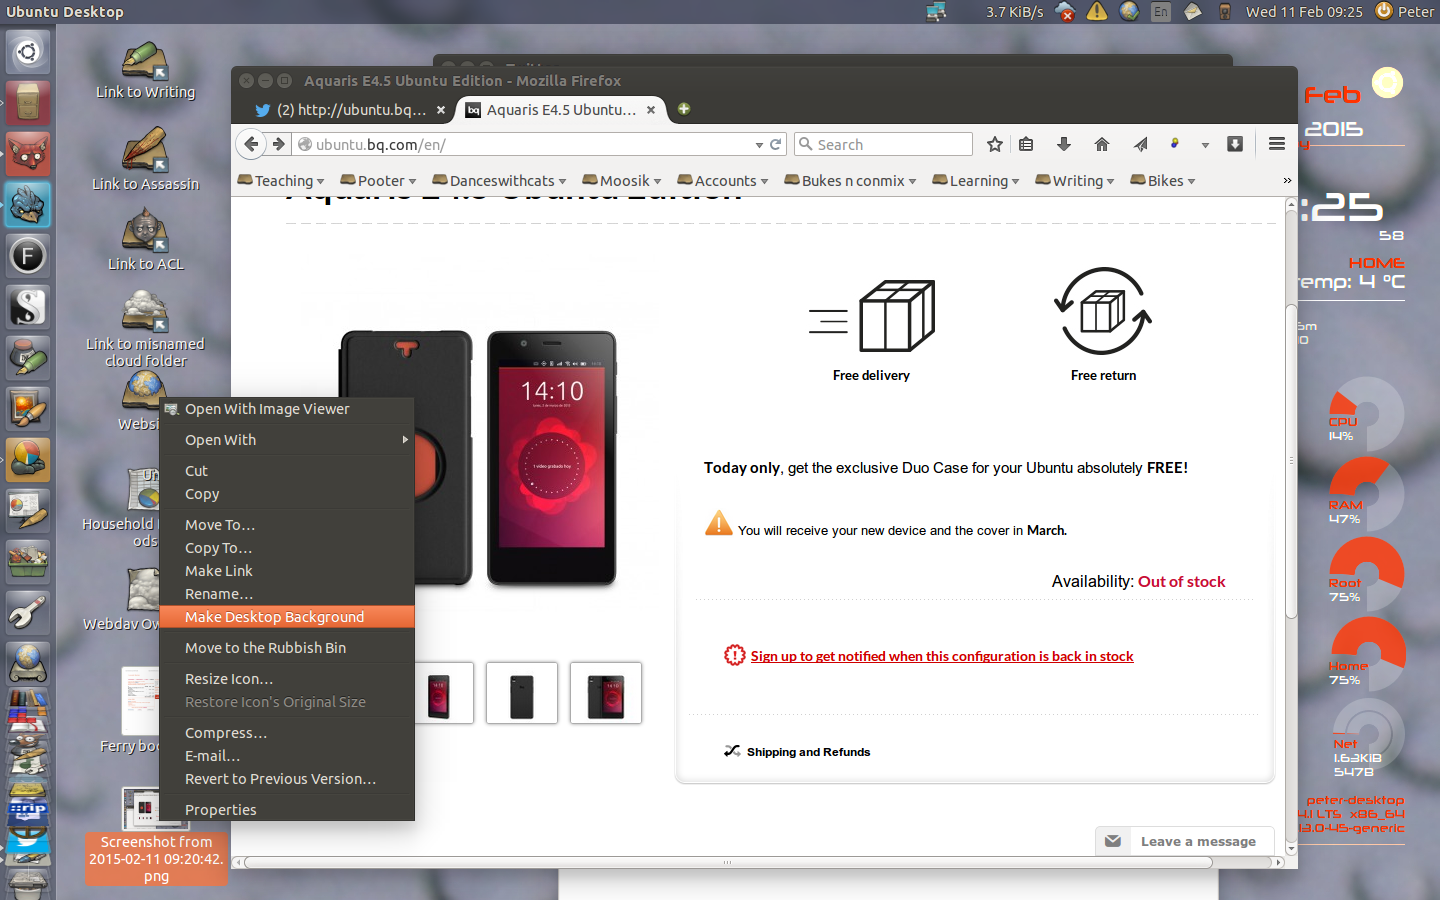 Another screenshot of Ubuntu with the left hand side applications menu, with a browser window open, showing a page advertising the Ubuntu phone.